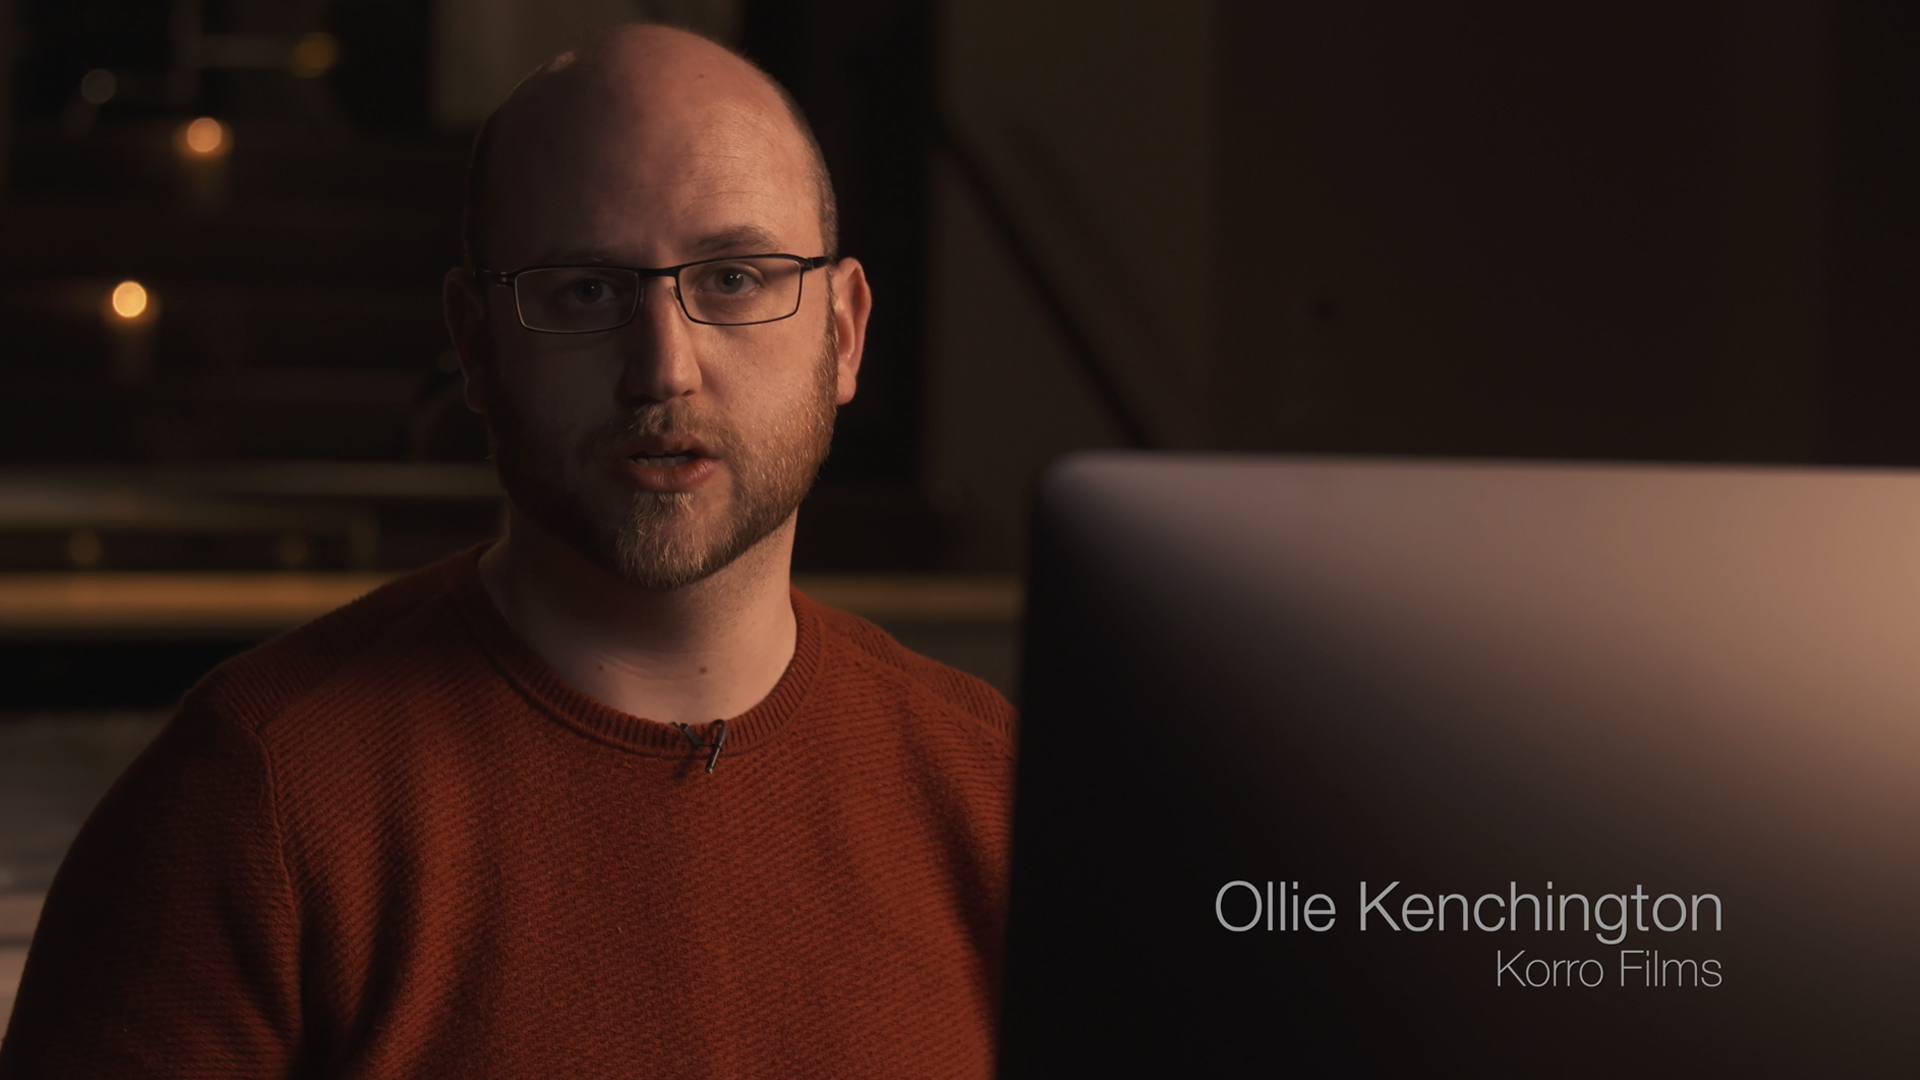 How to guide the viewer's attention with color - Ollie Kenchington